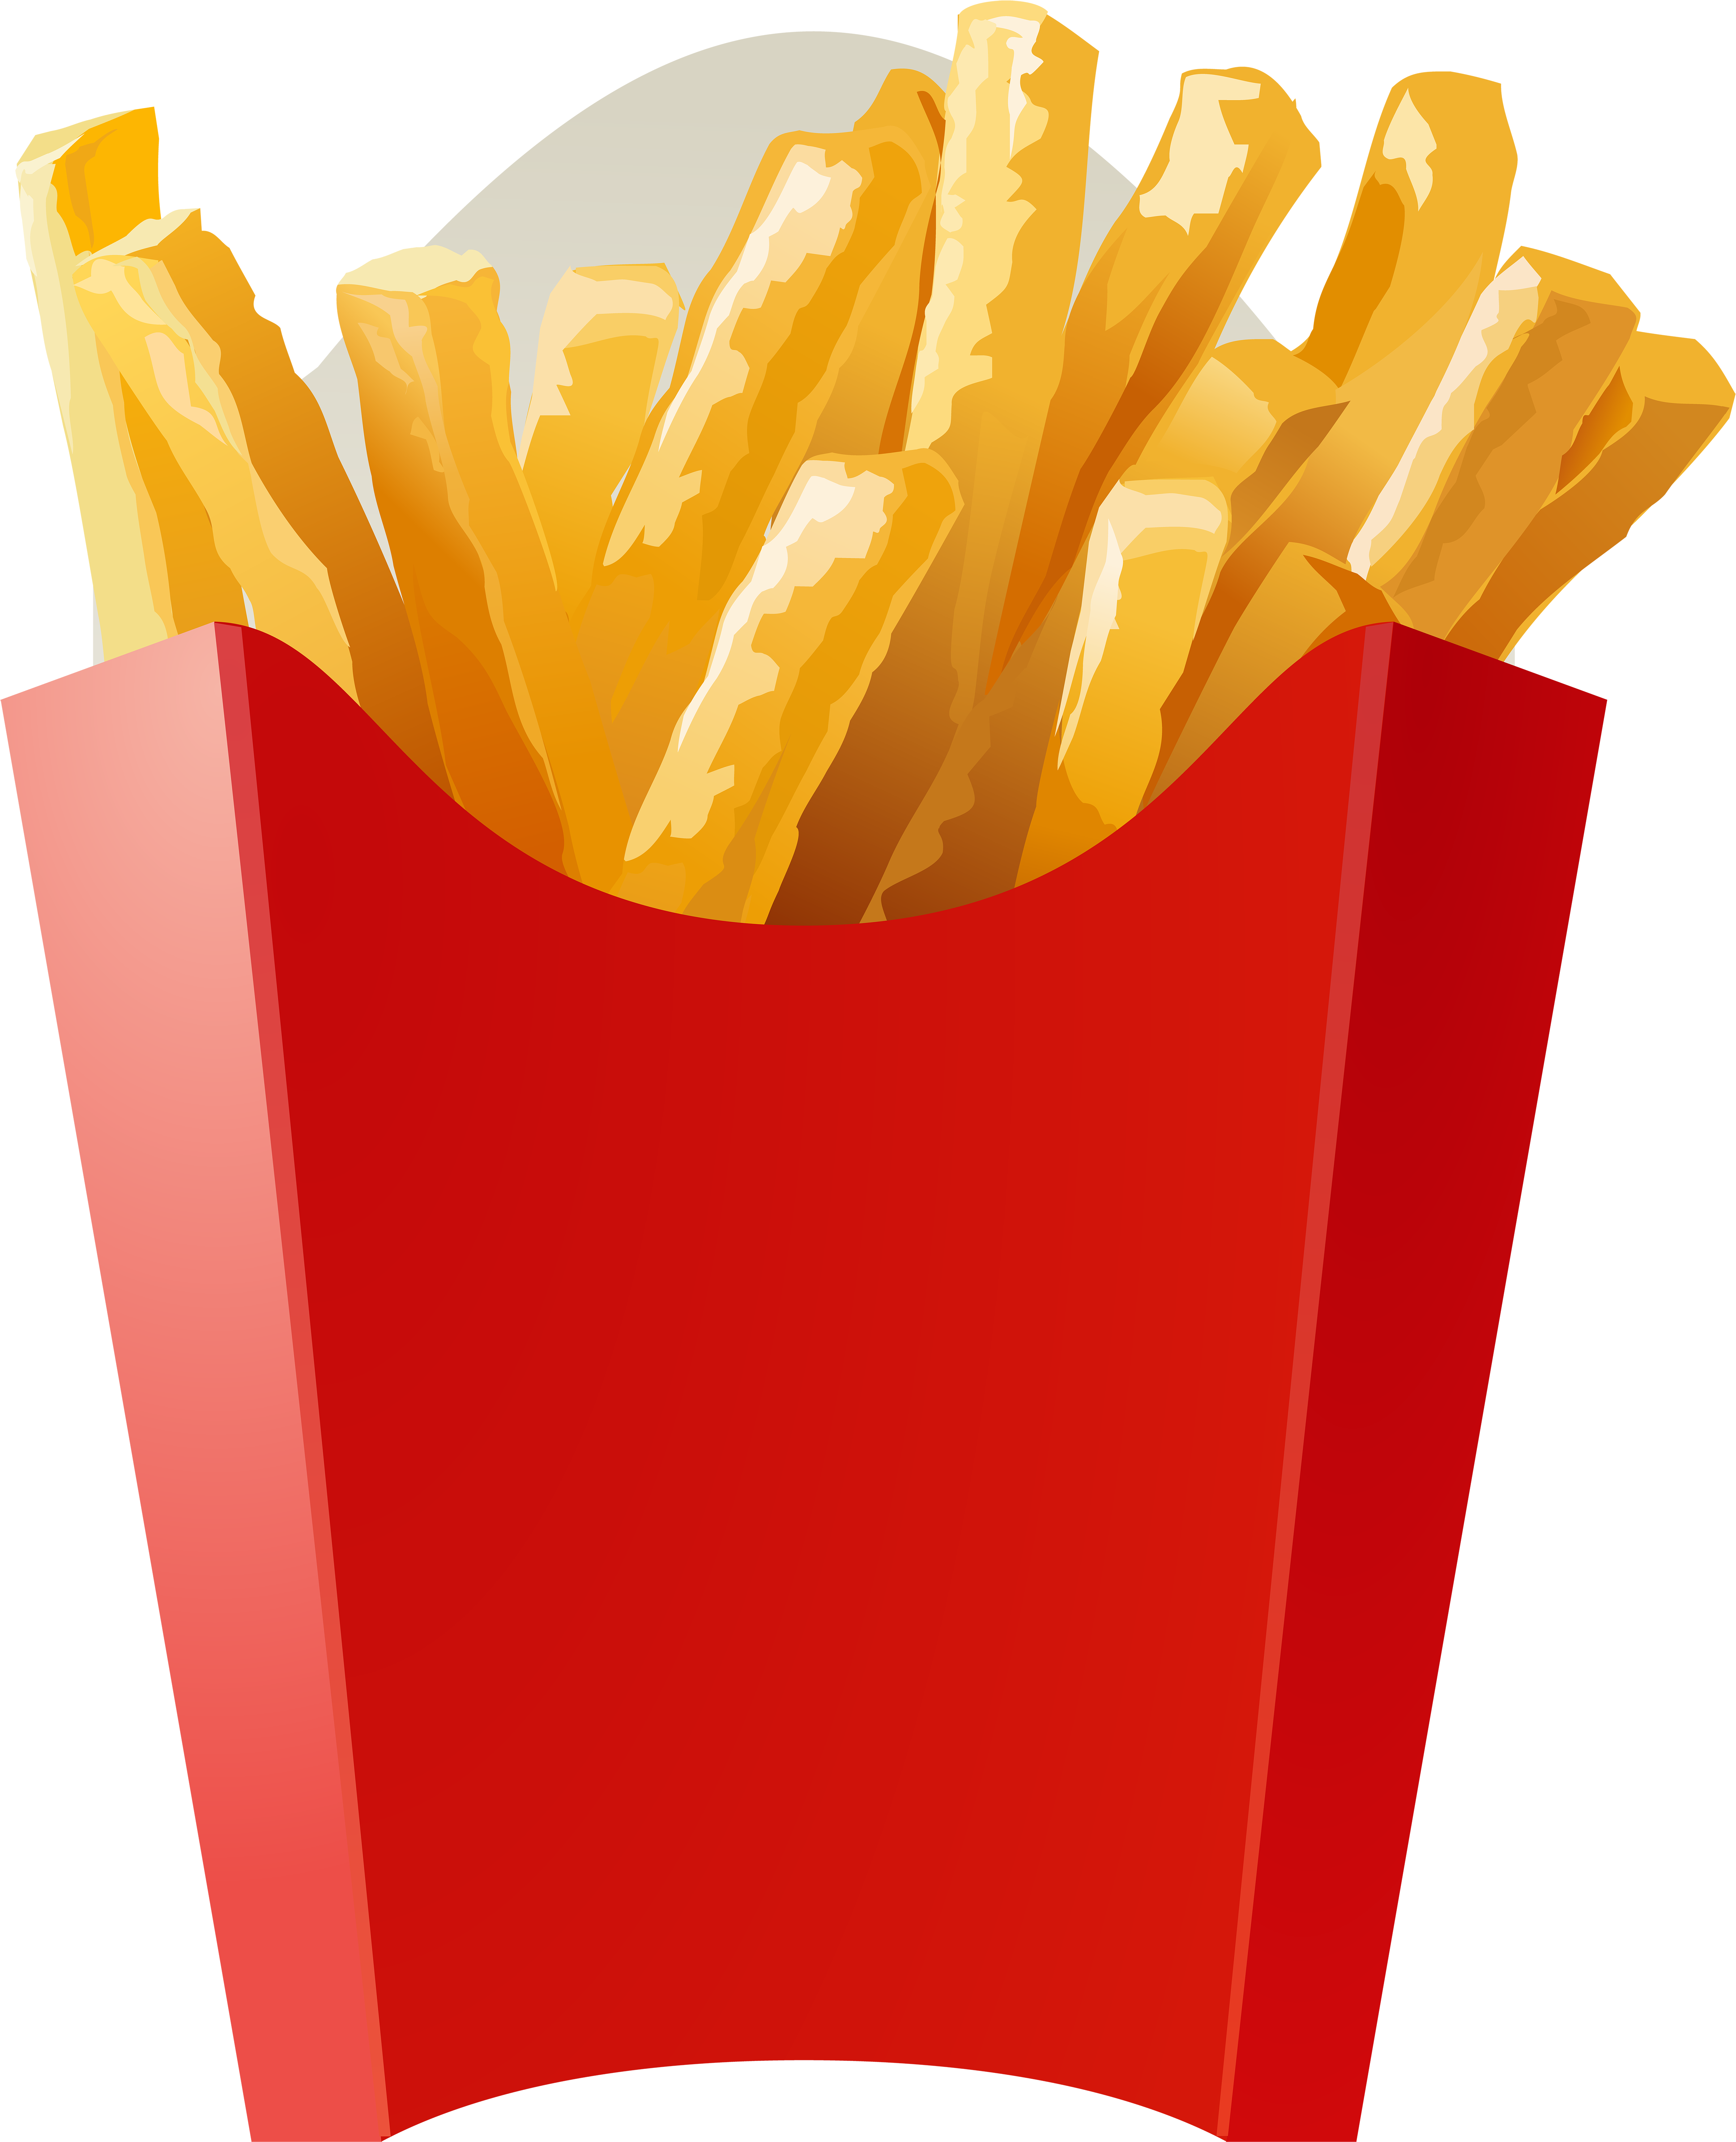 A Red Box Of French Fries